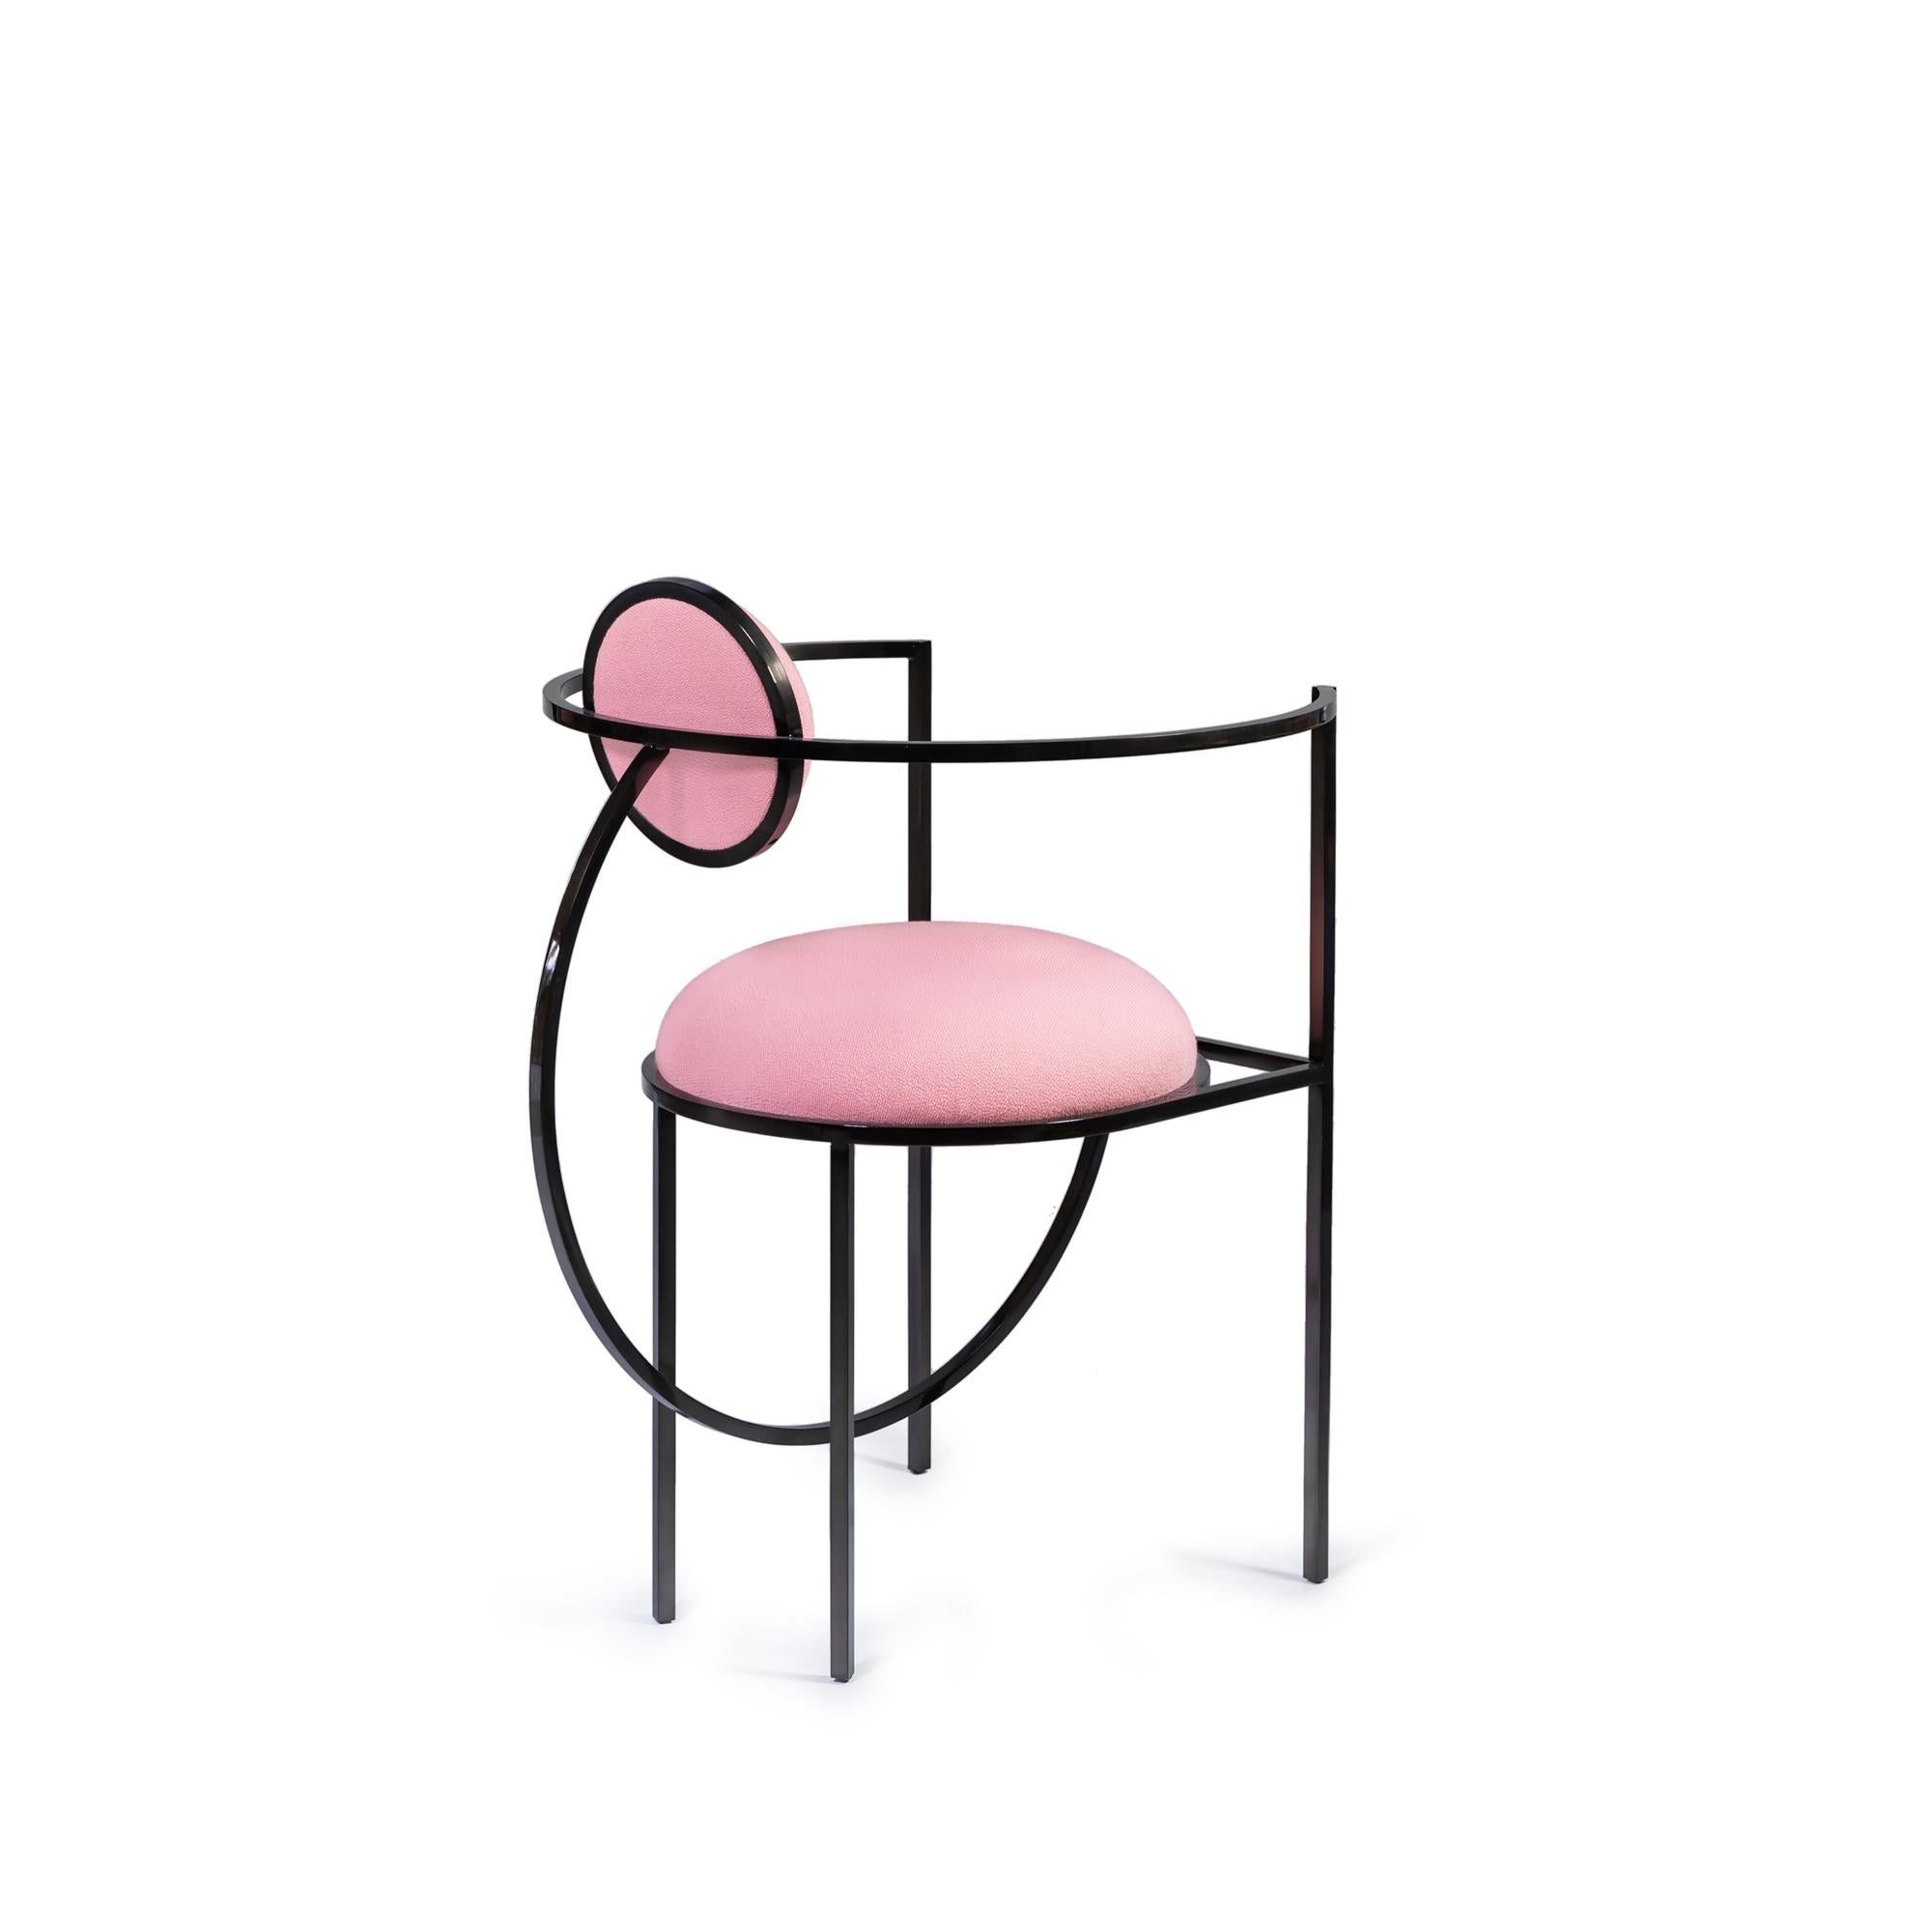 Modern Lunar Chair in Pink Wool Fabric and Black Steel Frame by Lara Bohinc For Sale